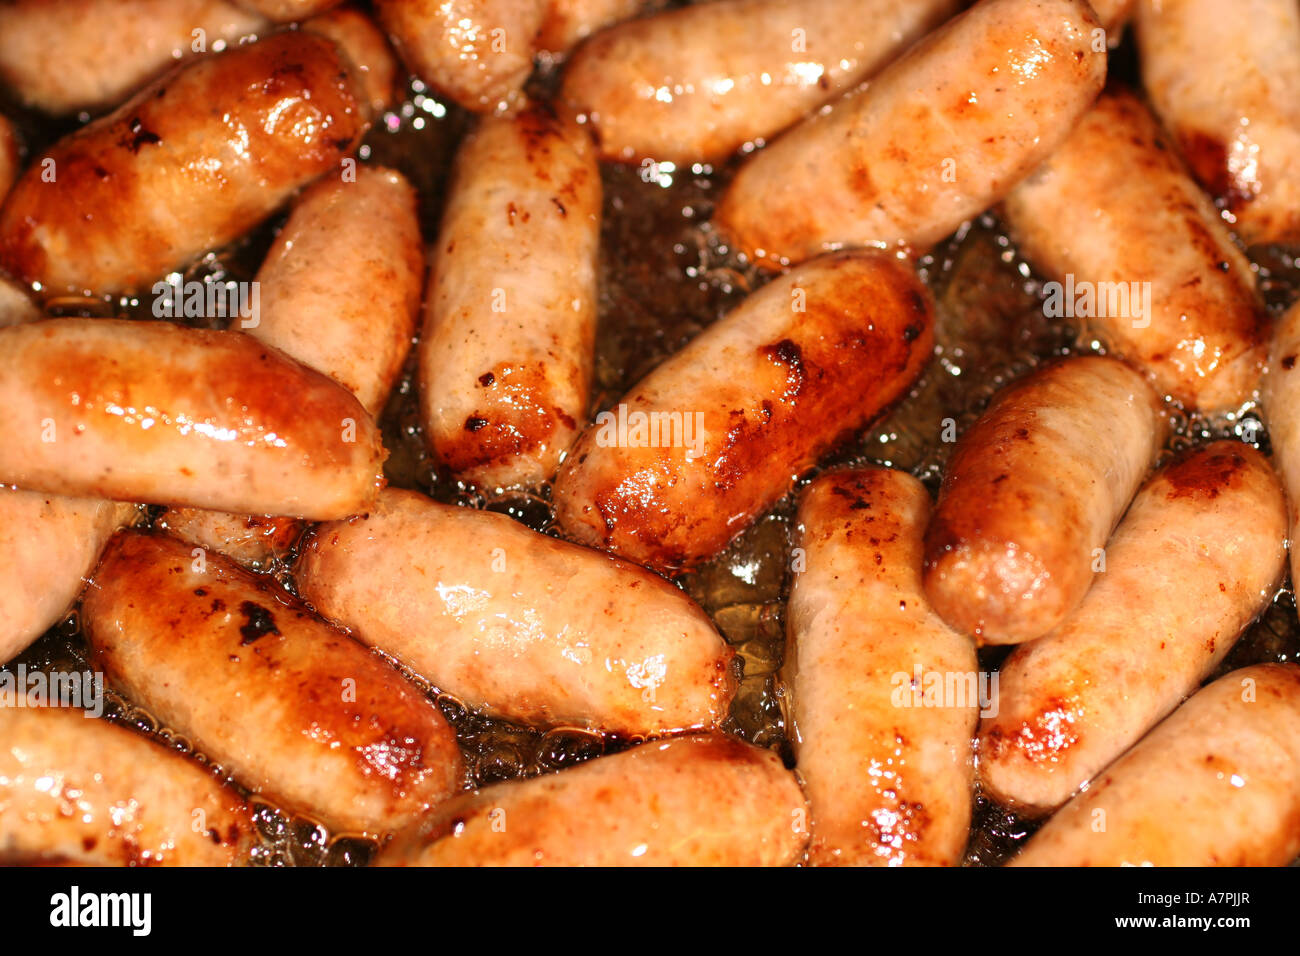 Small cocktail sausages cooking in a frying pan. Stock Photo